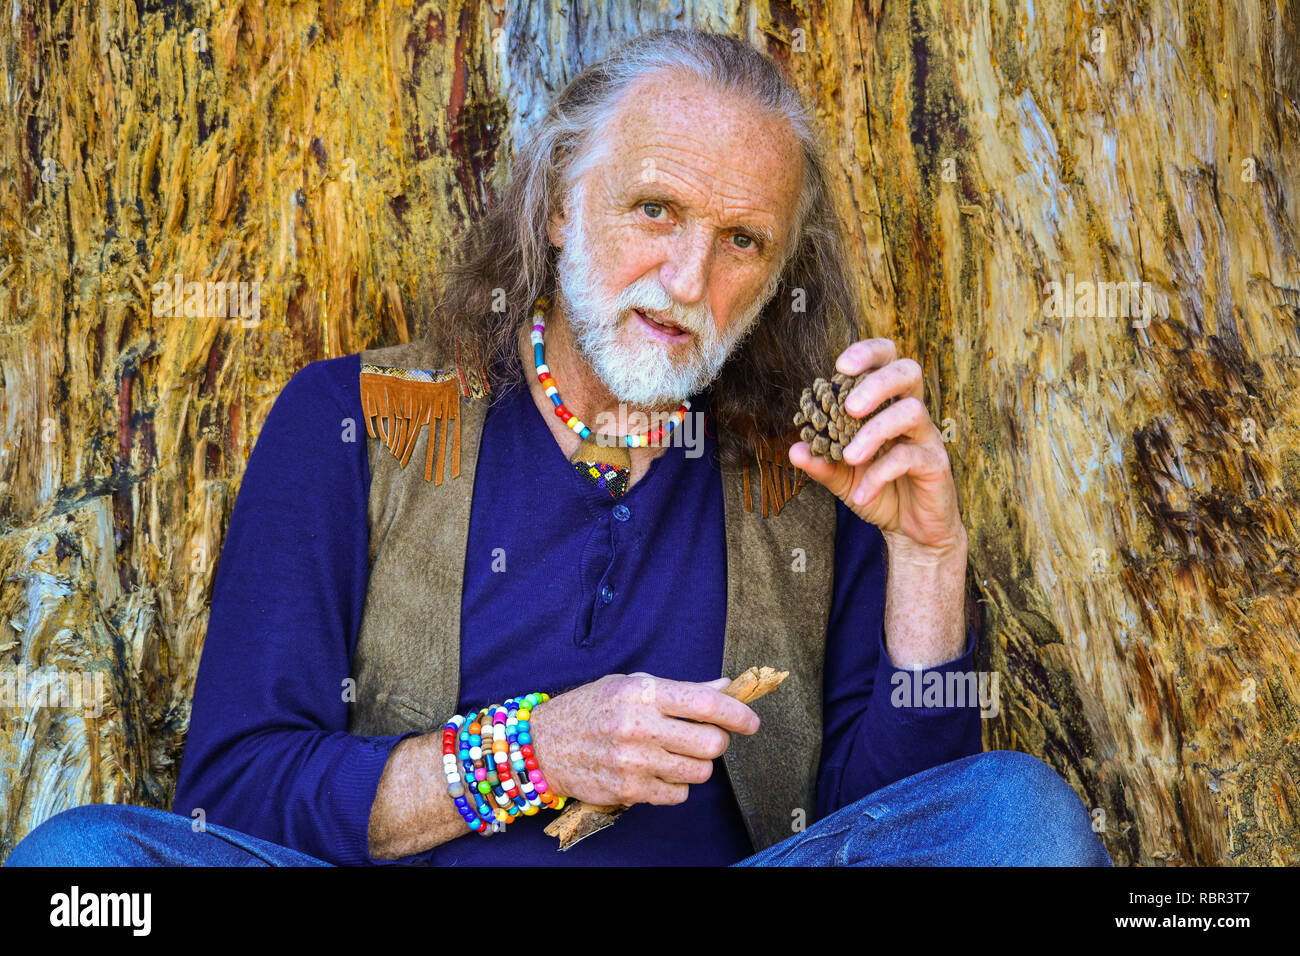 Old Hippie High Resolution Stock Photography and Images - Alamy